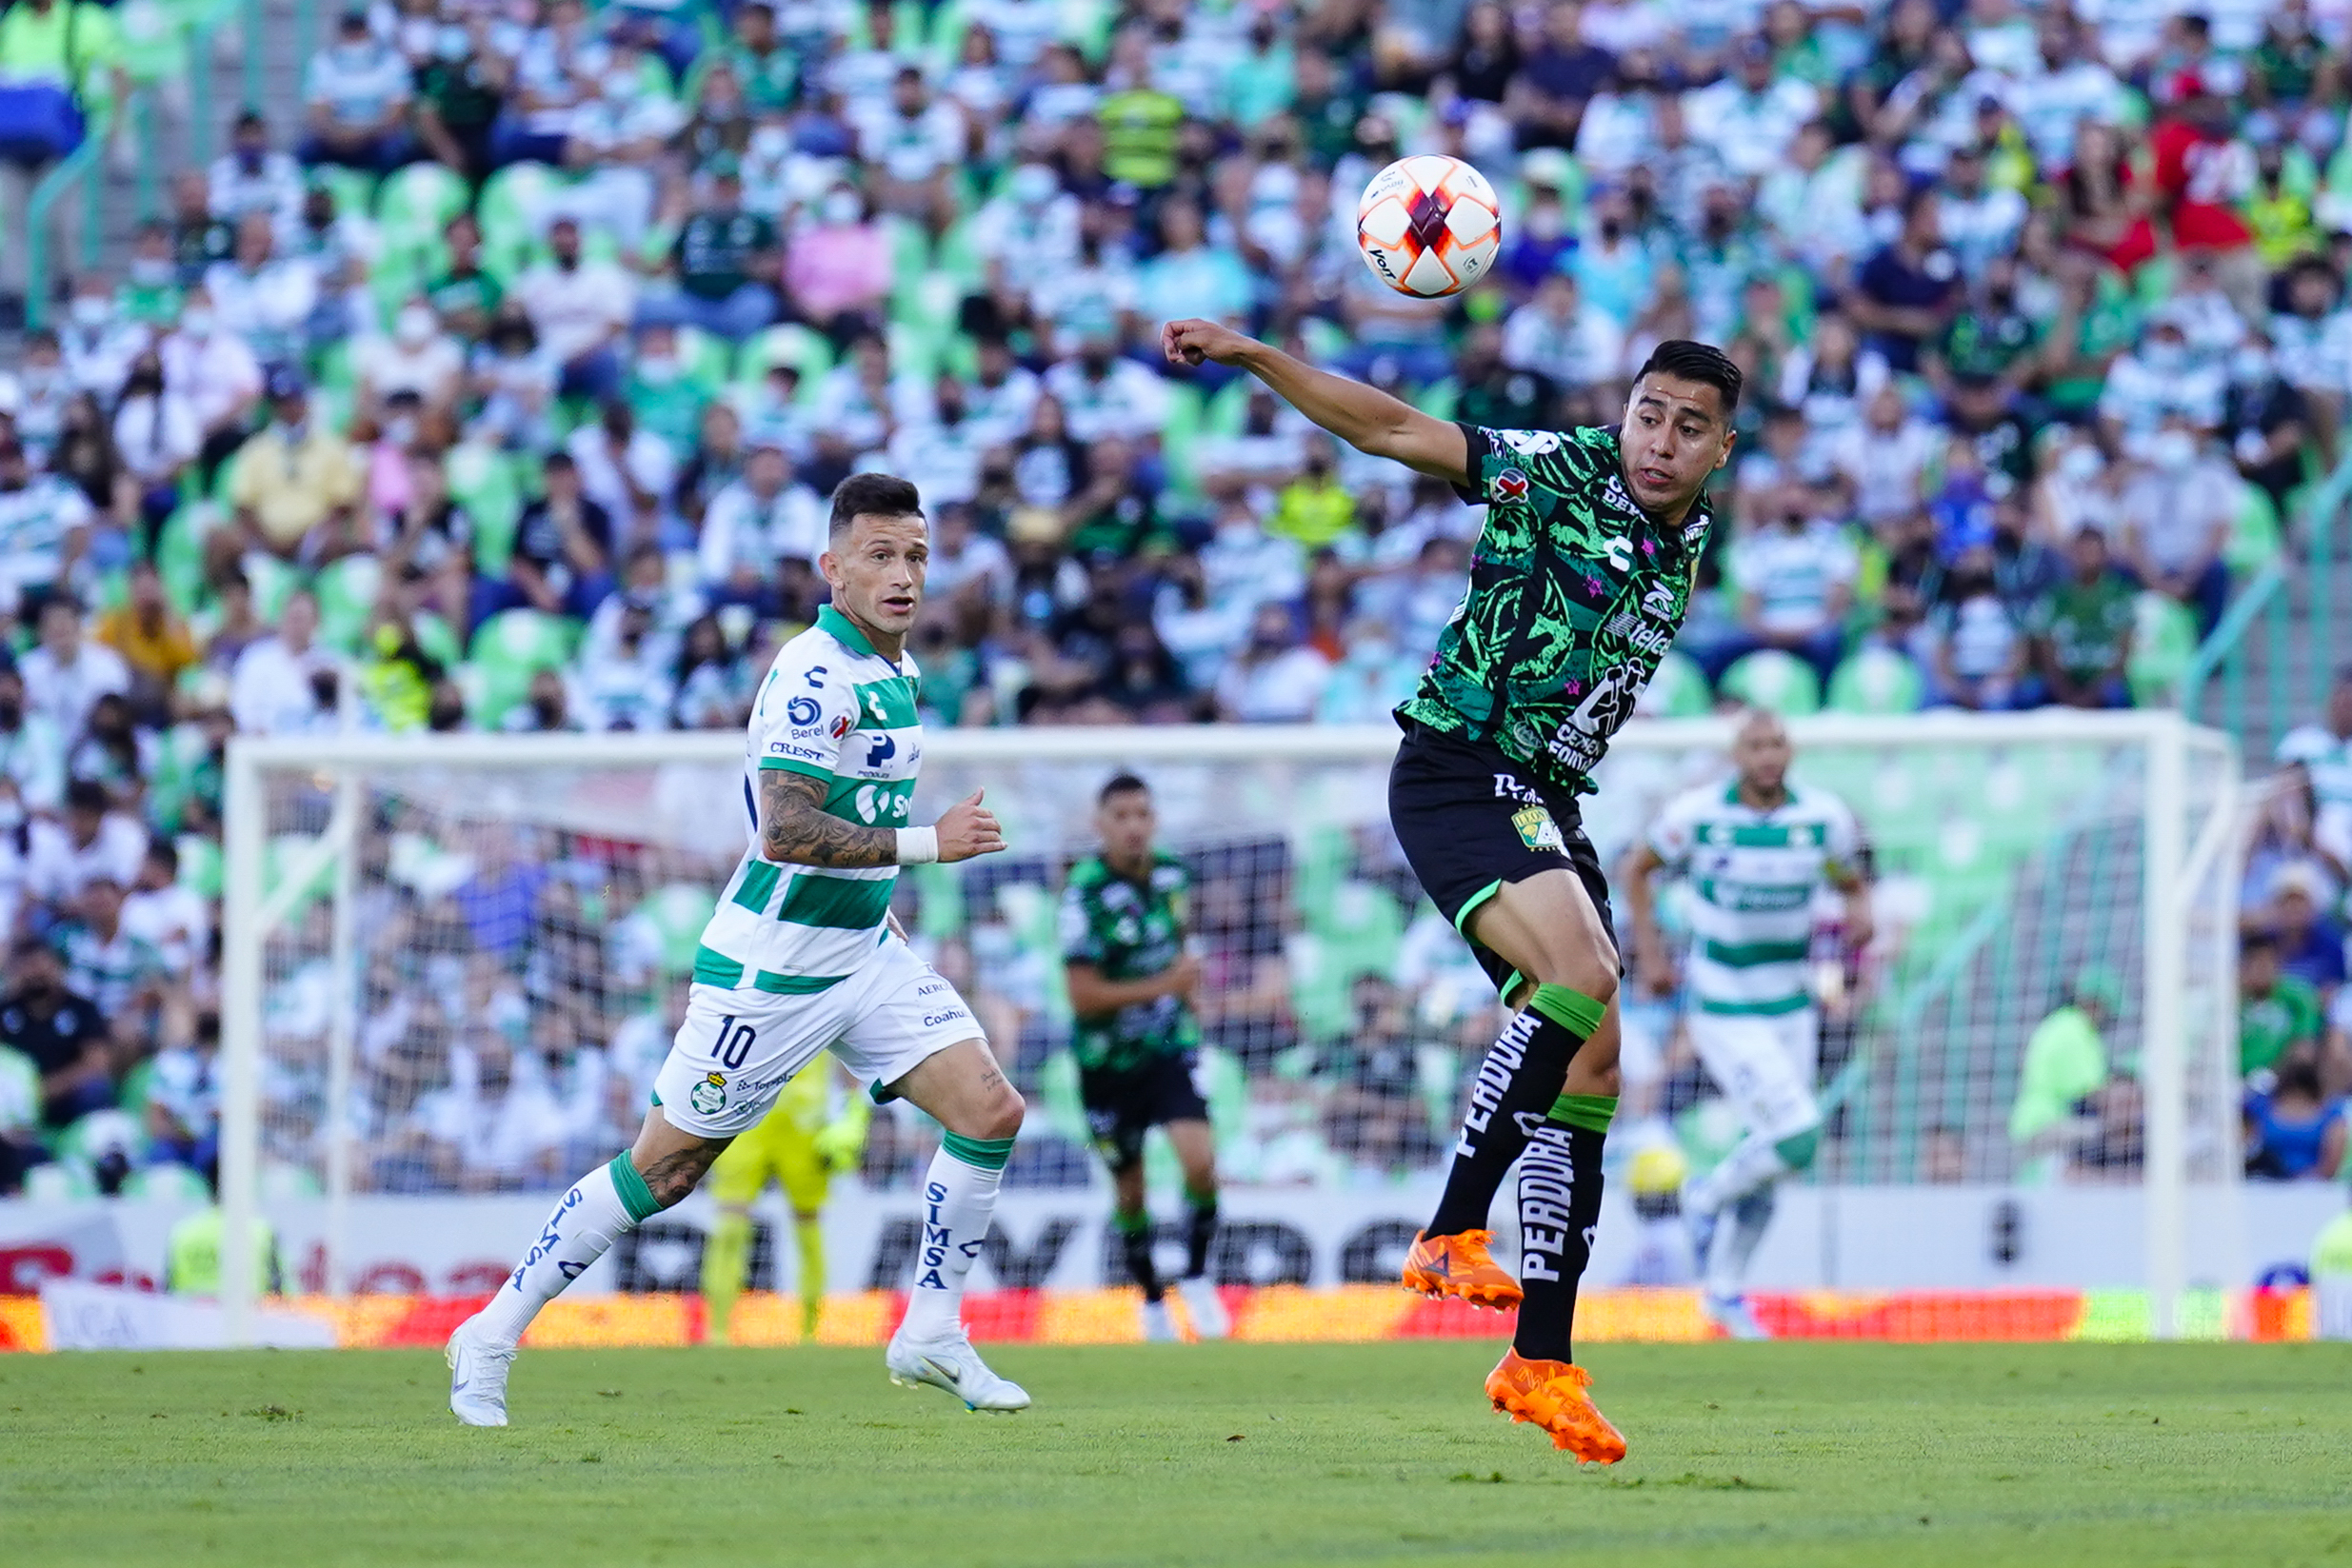 &nbsp;Brian Lozano (L) of Santos fights for the ball with Fidel Ambriz (R) of Leon during the 16th round match between Santos Laguna and Leon as part of the Torneo Grita Mexico C22 Liga MX at Corona Stadium on April 24, 2022 in Torreon, Mexico.